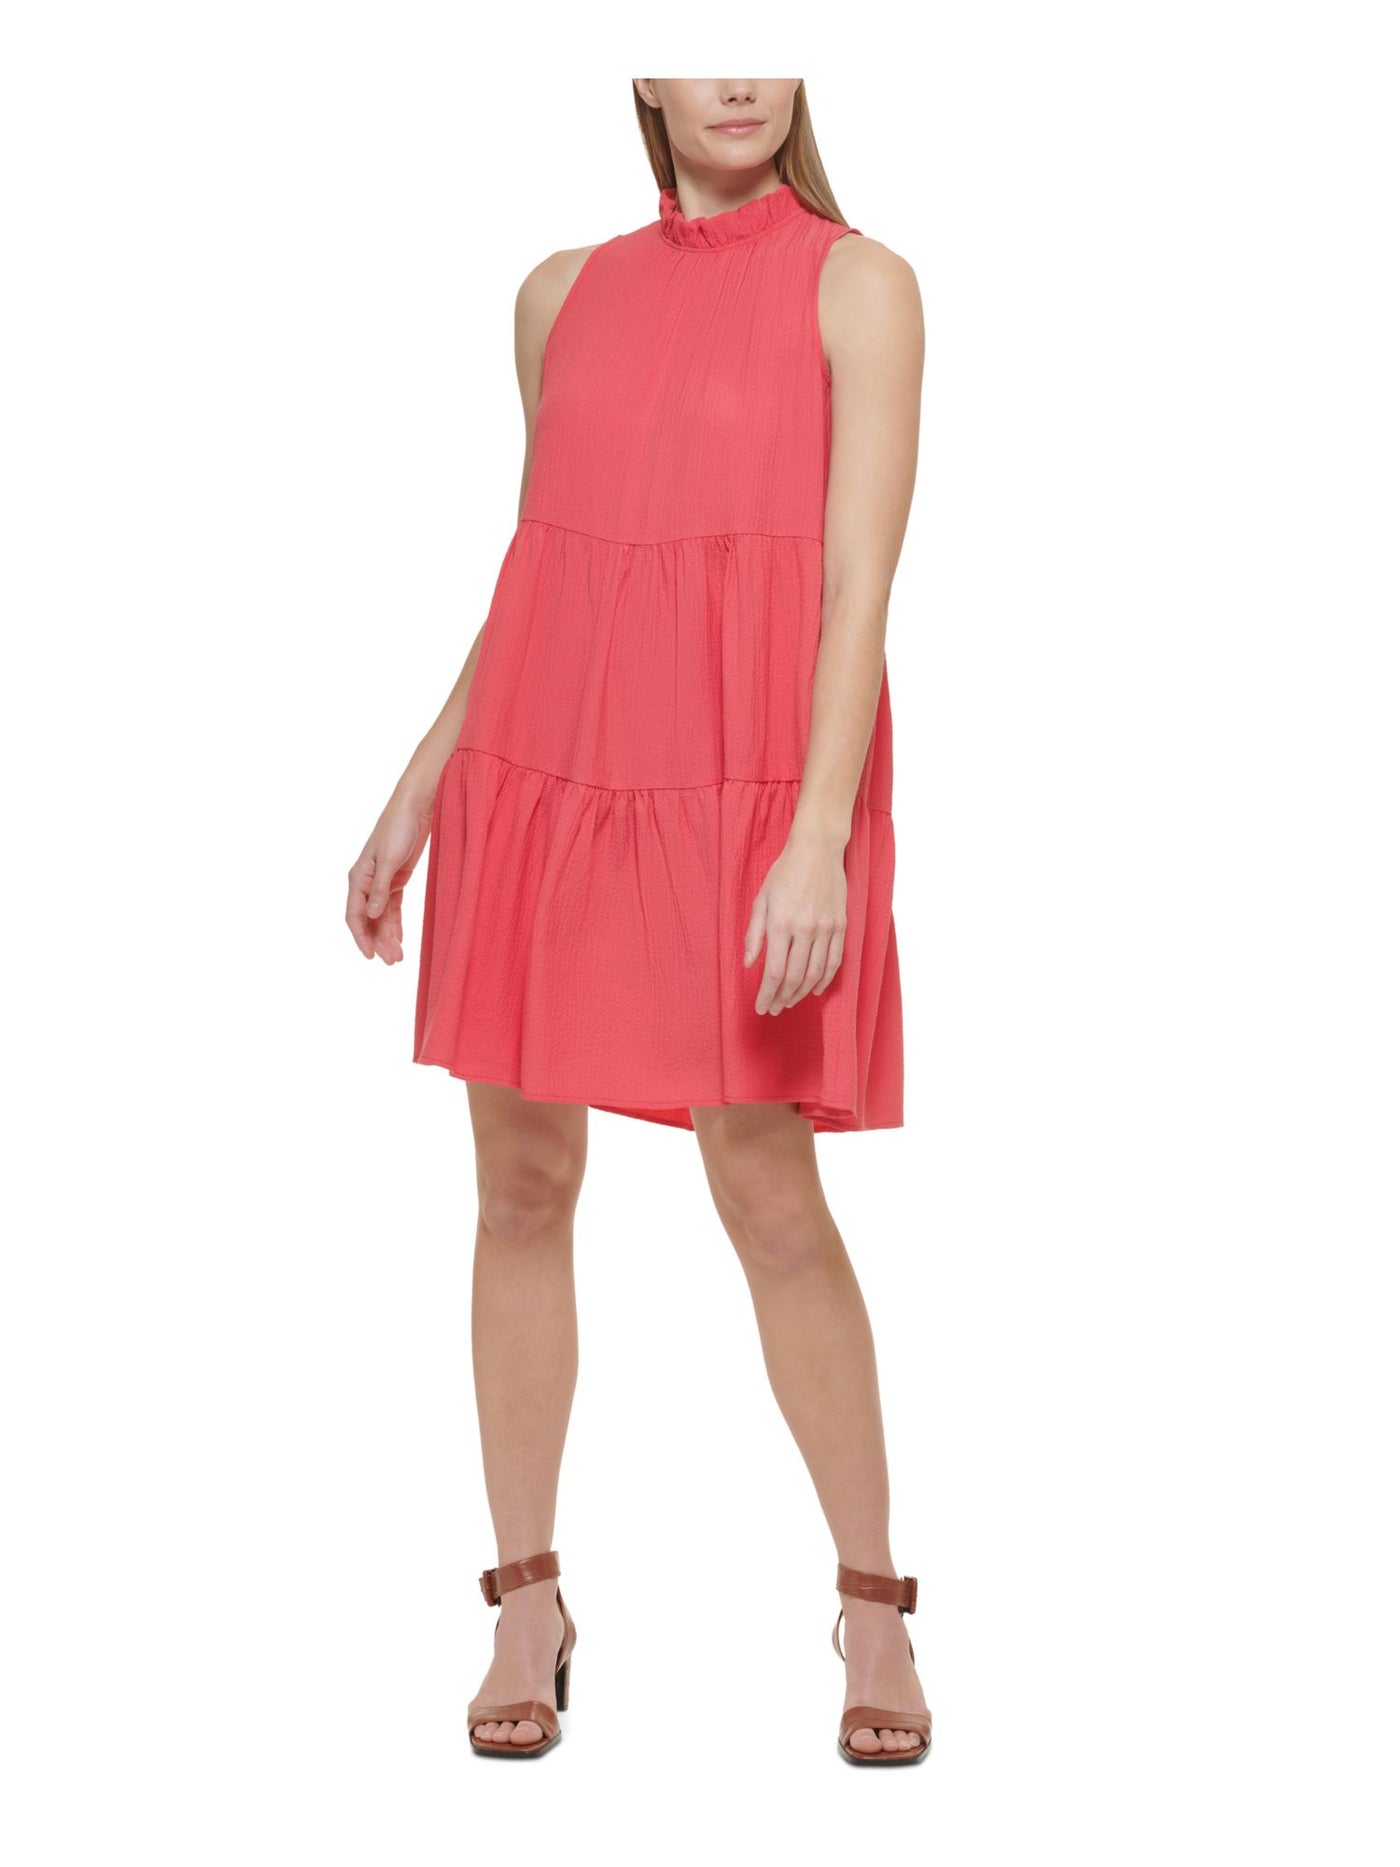 CALVIN KLEIN Womens Pink Pocketed Ruffled Back Button Keyhole Tiered Sleeveless Mock Neck Above The Knee A-Line Dress 6